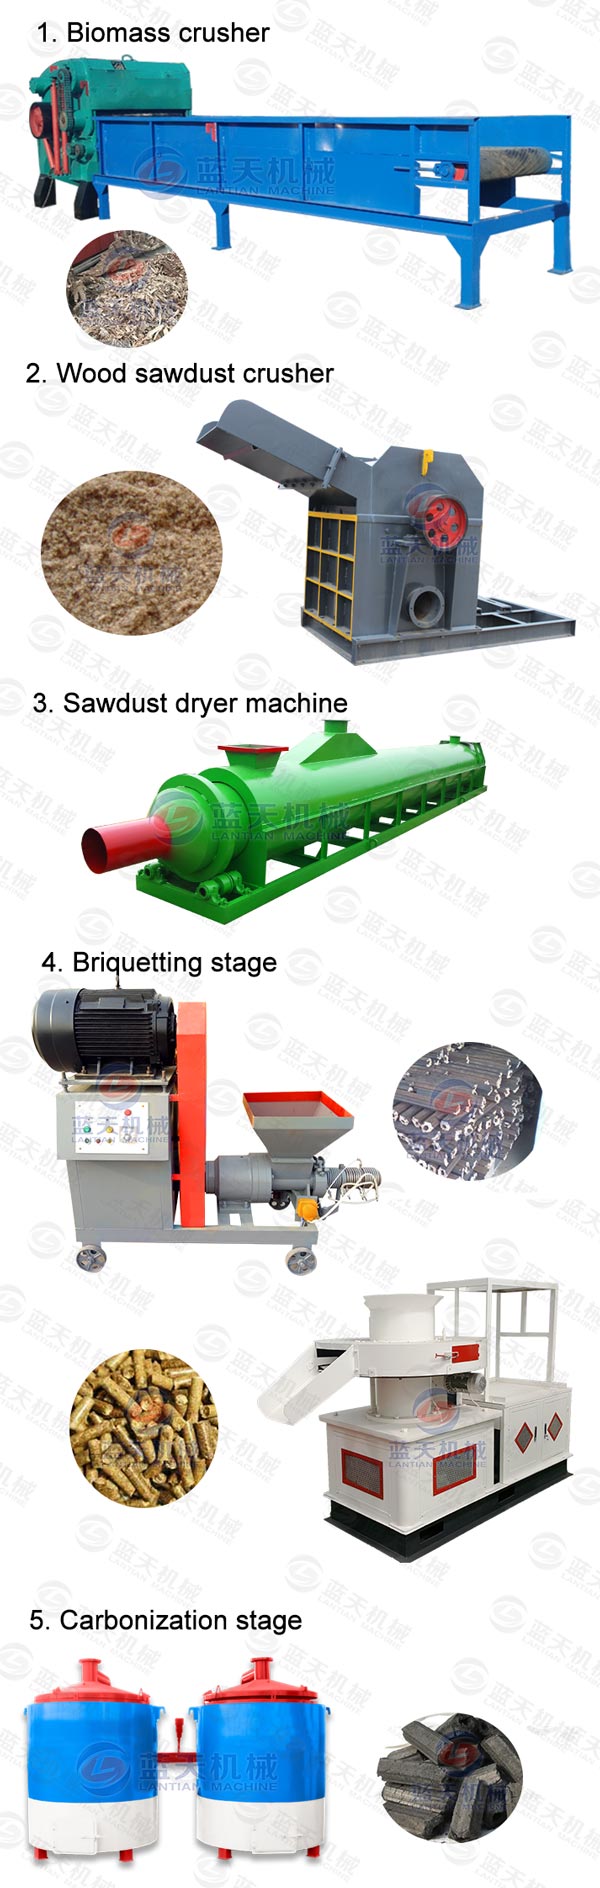 Product line of biomass crusher